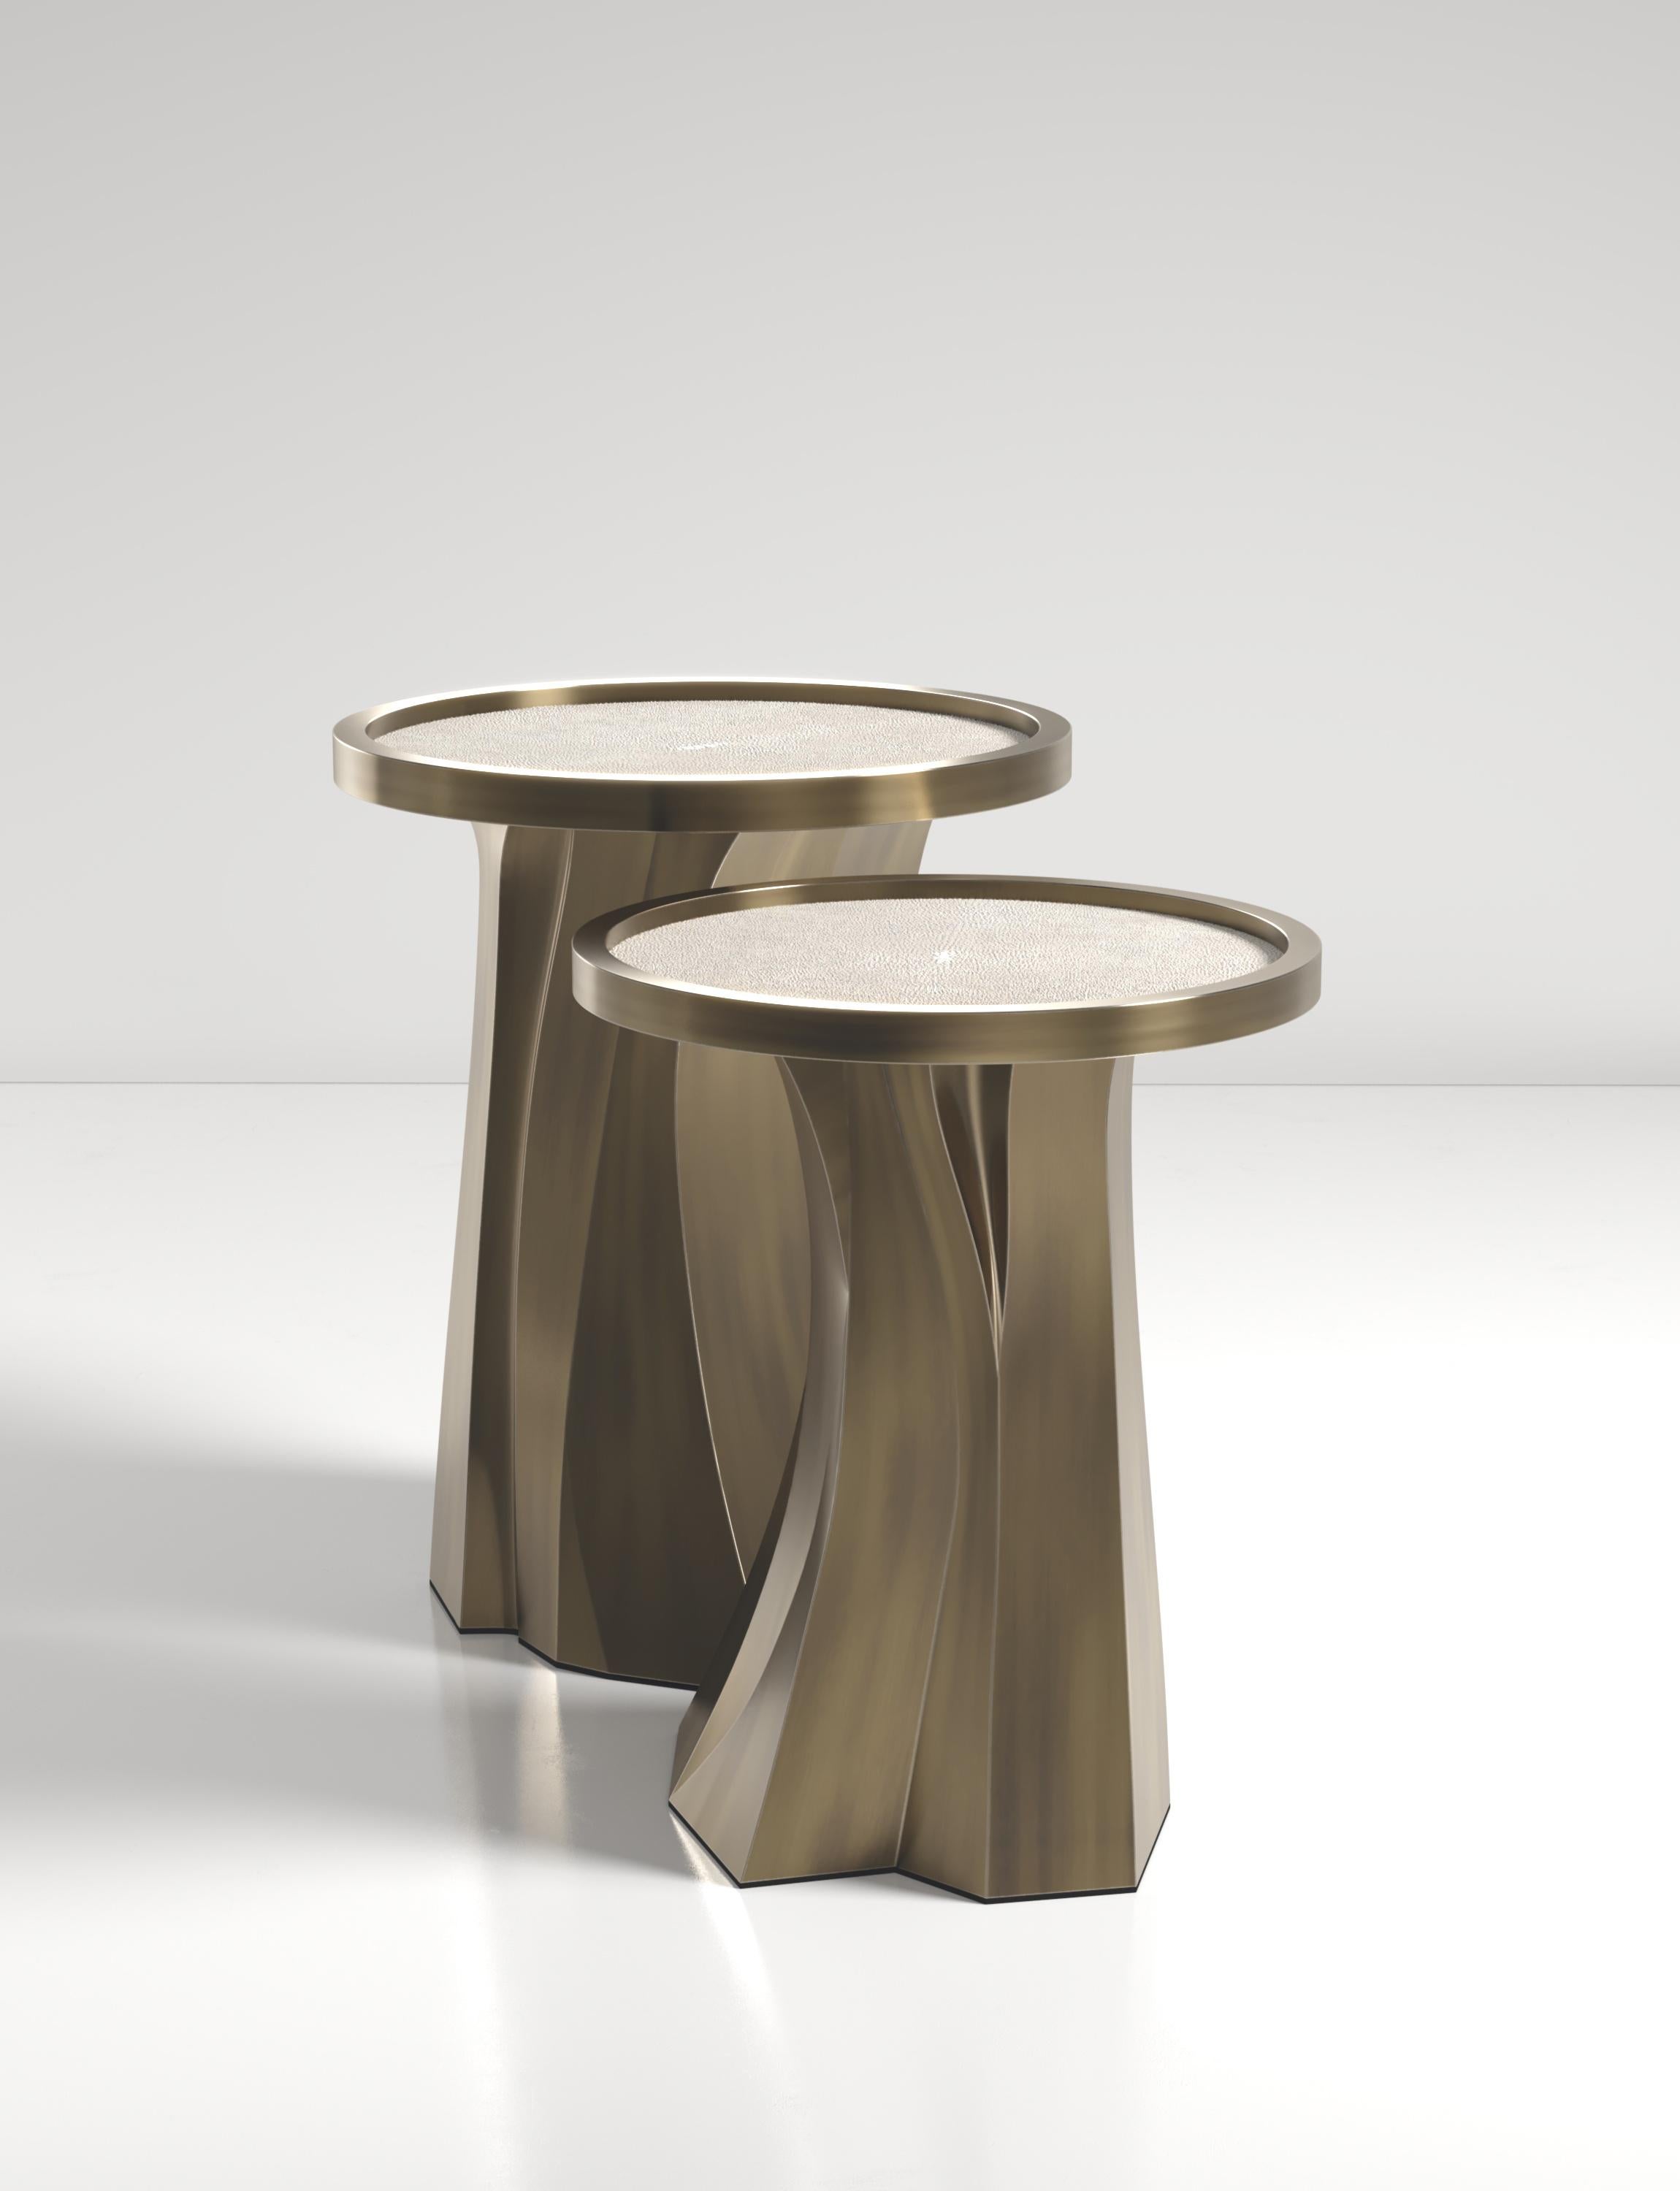 The Alma Nesting Tables by R&Y Augousti are sculptural and versatile pieces. The cream shagreen inlaid top morphs into a dramatic hand-carved bronze-patina base. The grooves and details on the base allow the tables to have different expressions from